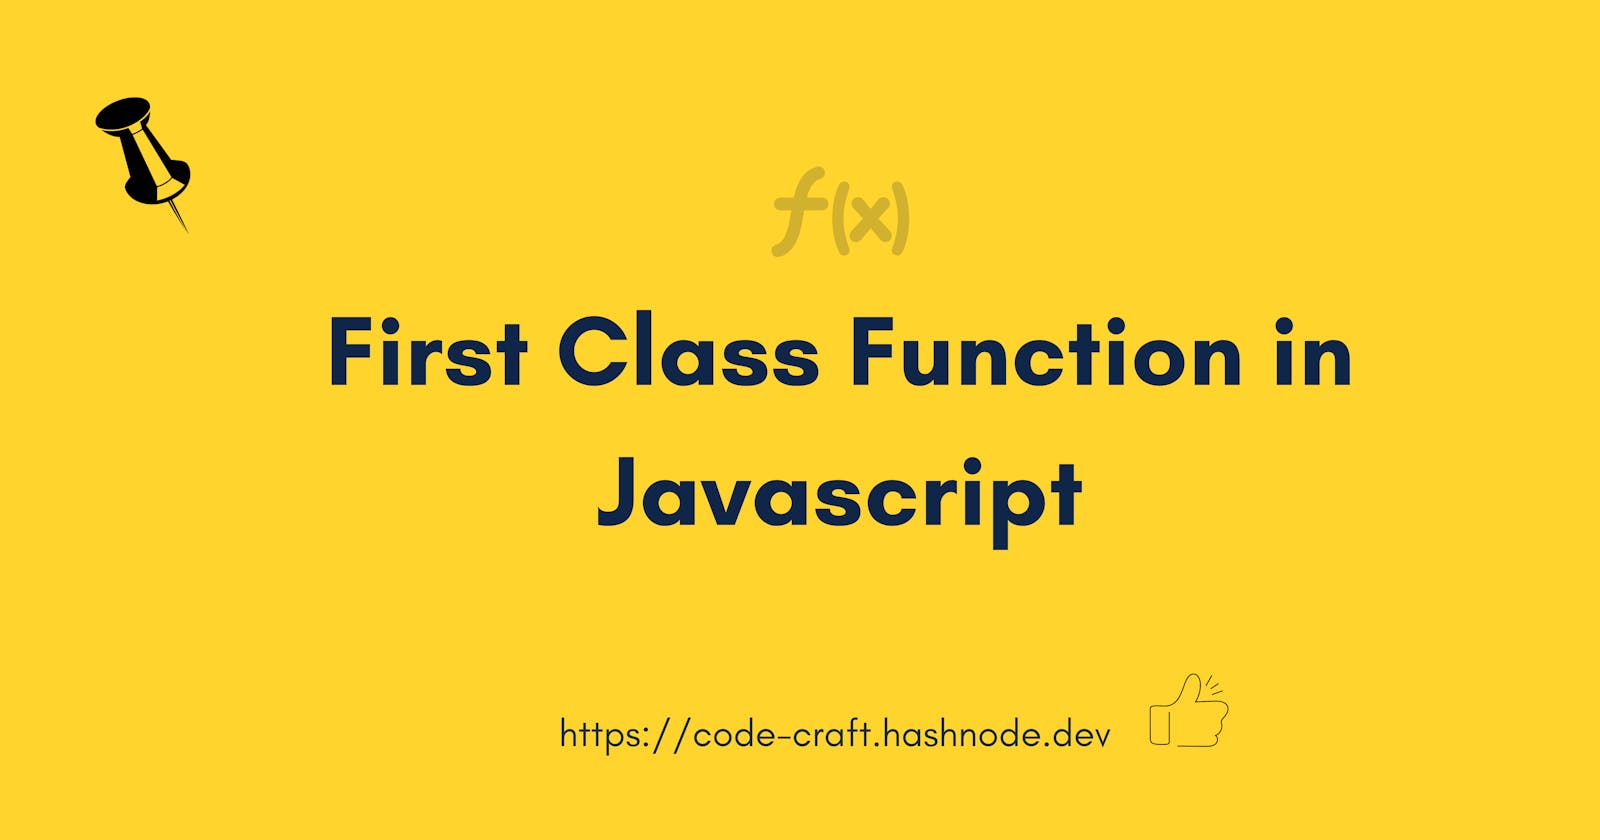 First Class Function in Javascript